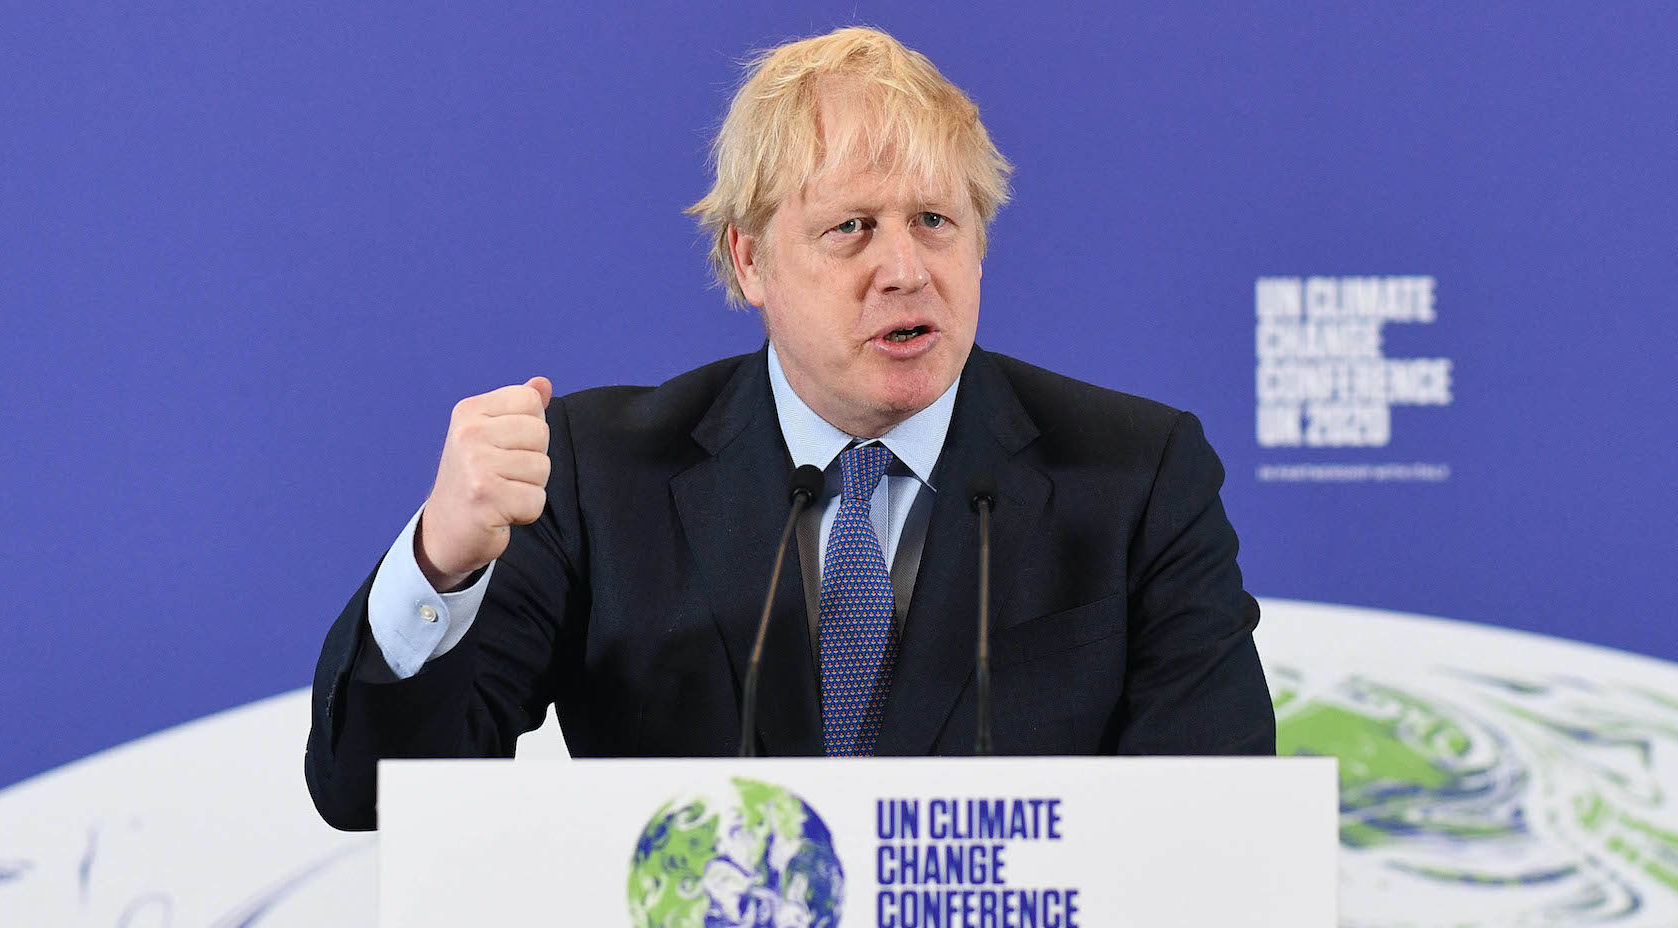 Boris Johnson at the launch of COP26. Image: Andrew Parsons / No10 Downing Street